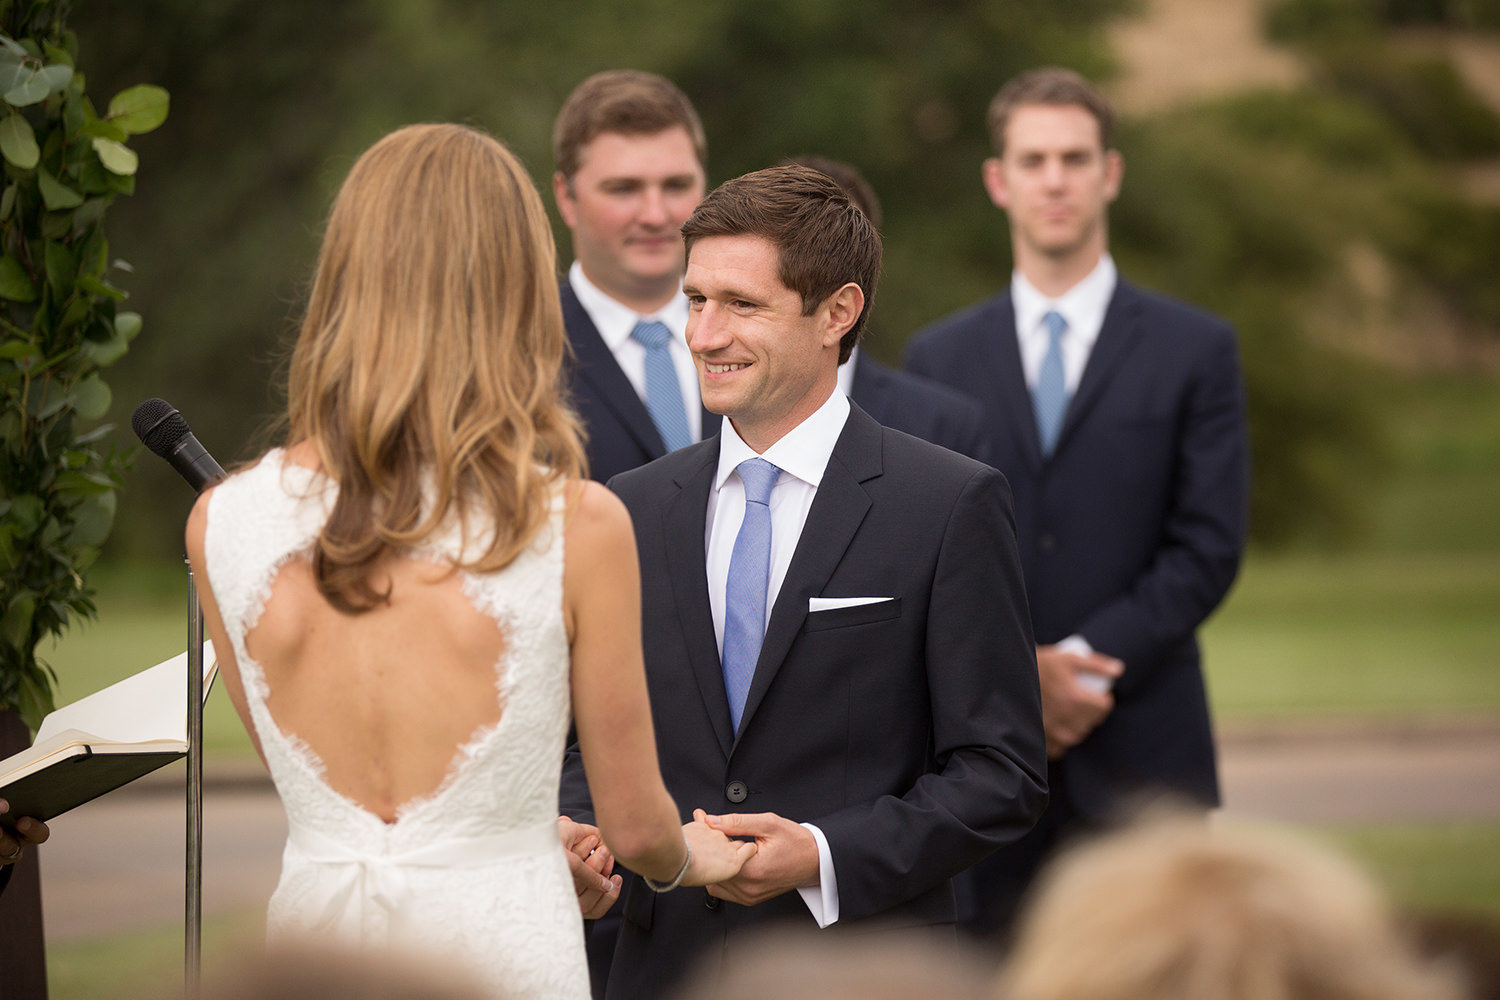 saying vows at ceremony